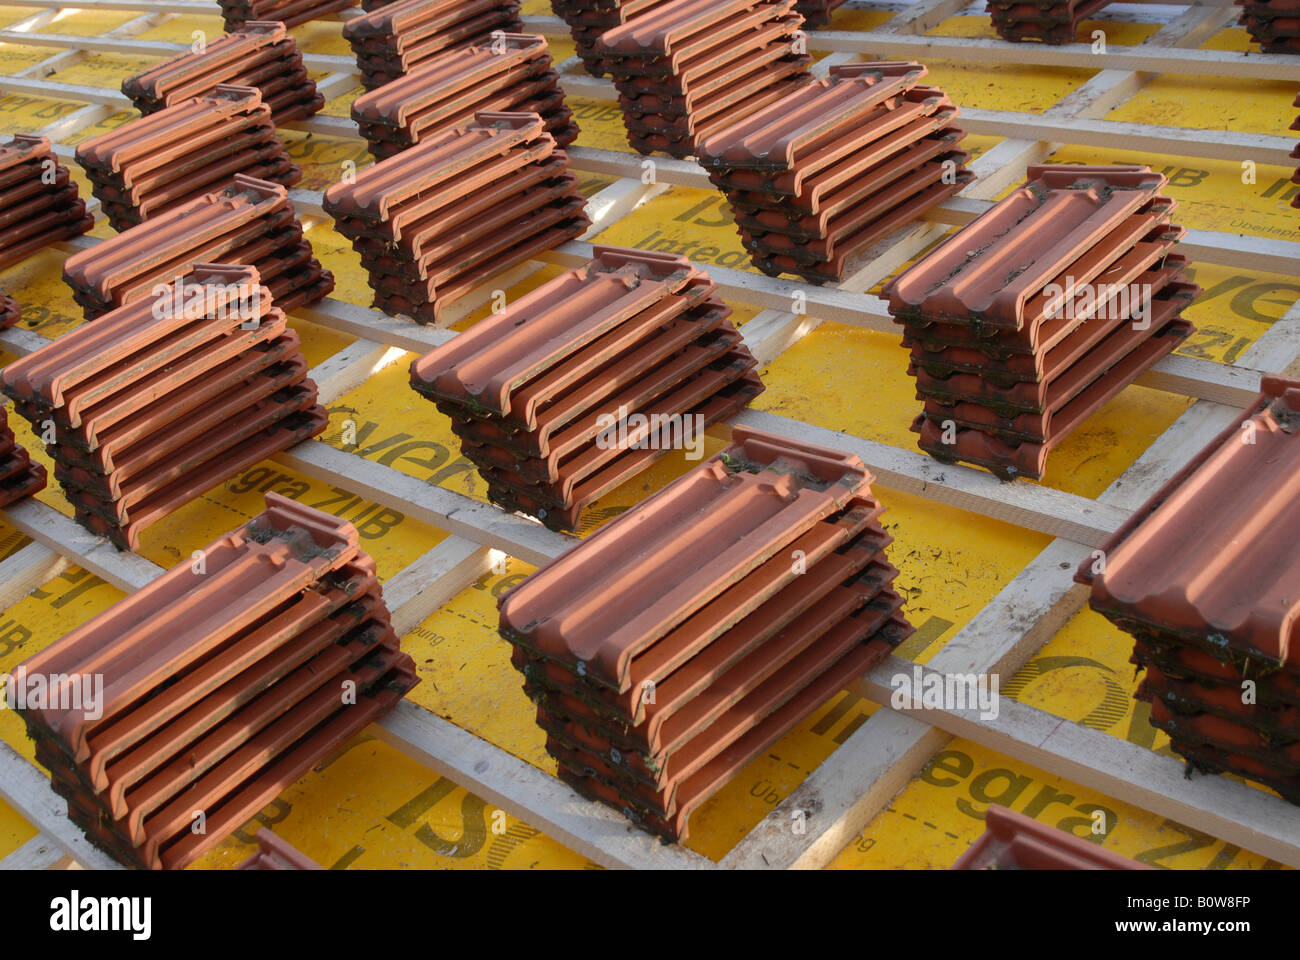 Roofing tiles resting on wooden roof slats at a construction site ready for laying Stock Photo